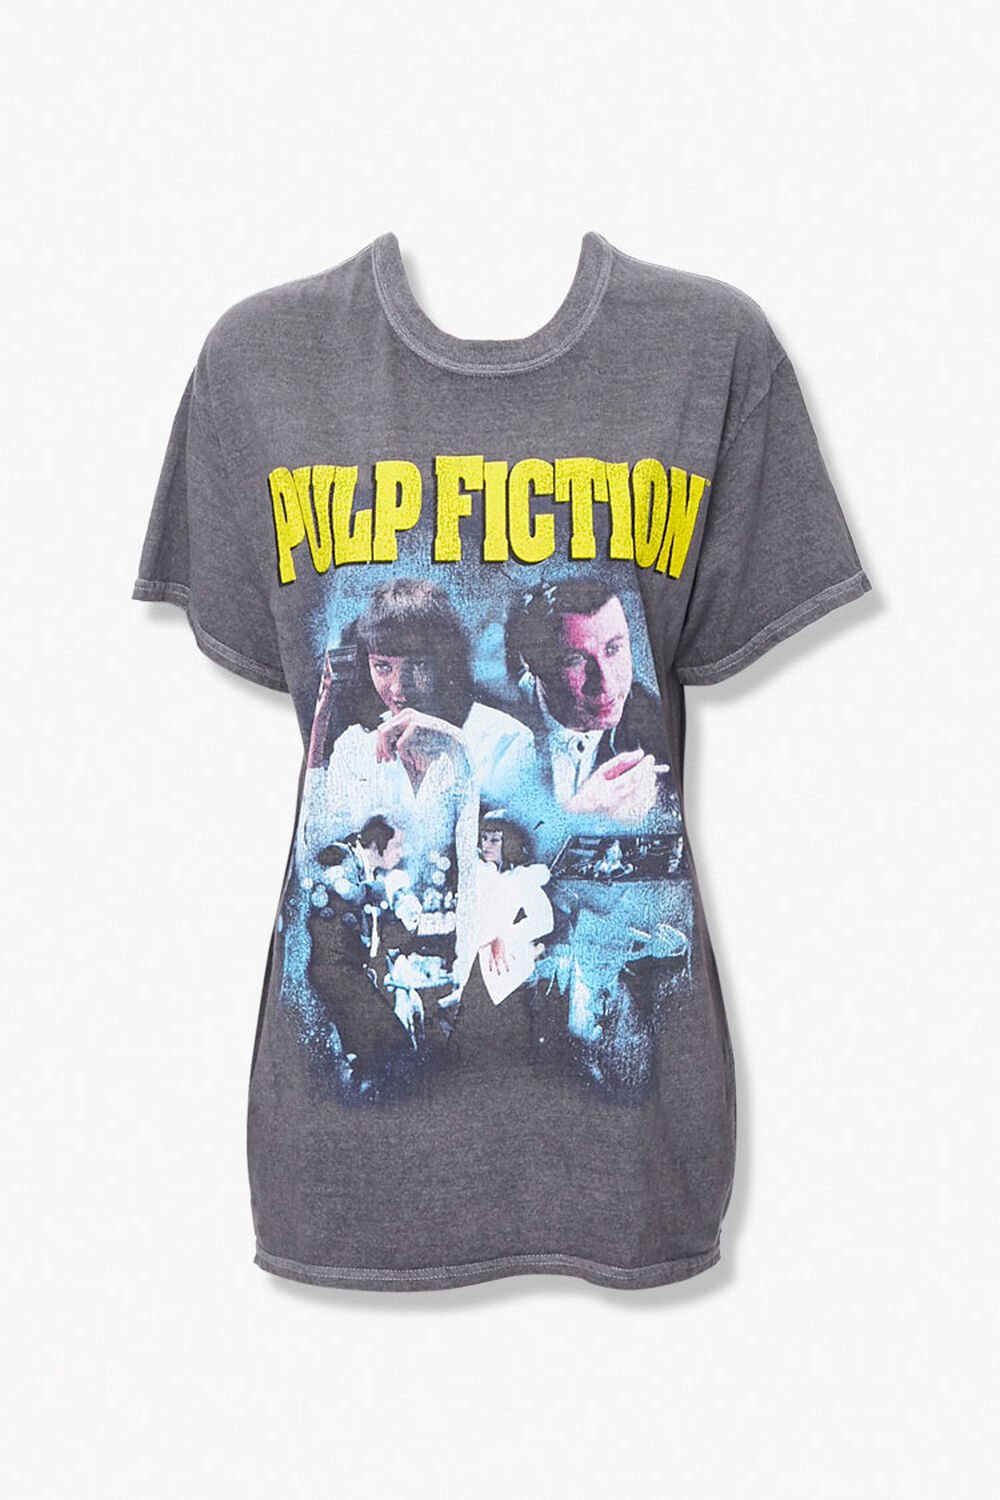 CHARCOAL/MULTI Pulp Fiction Graphic Tee, image 1